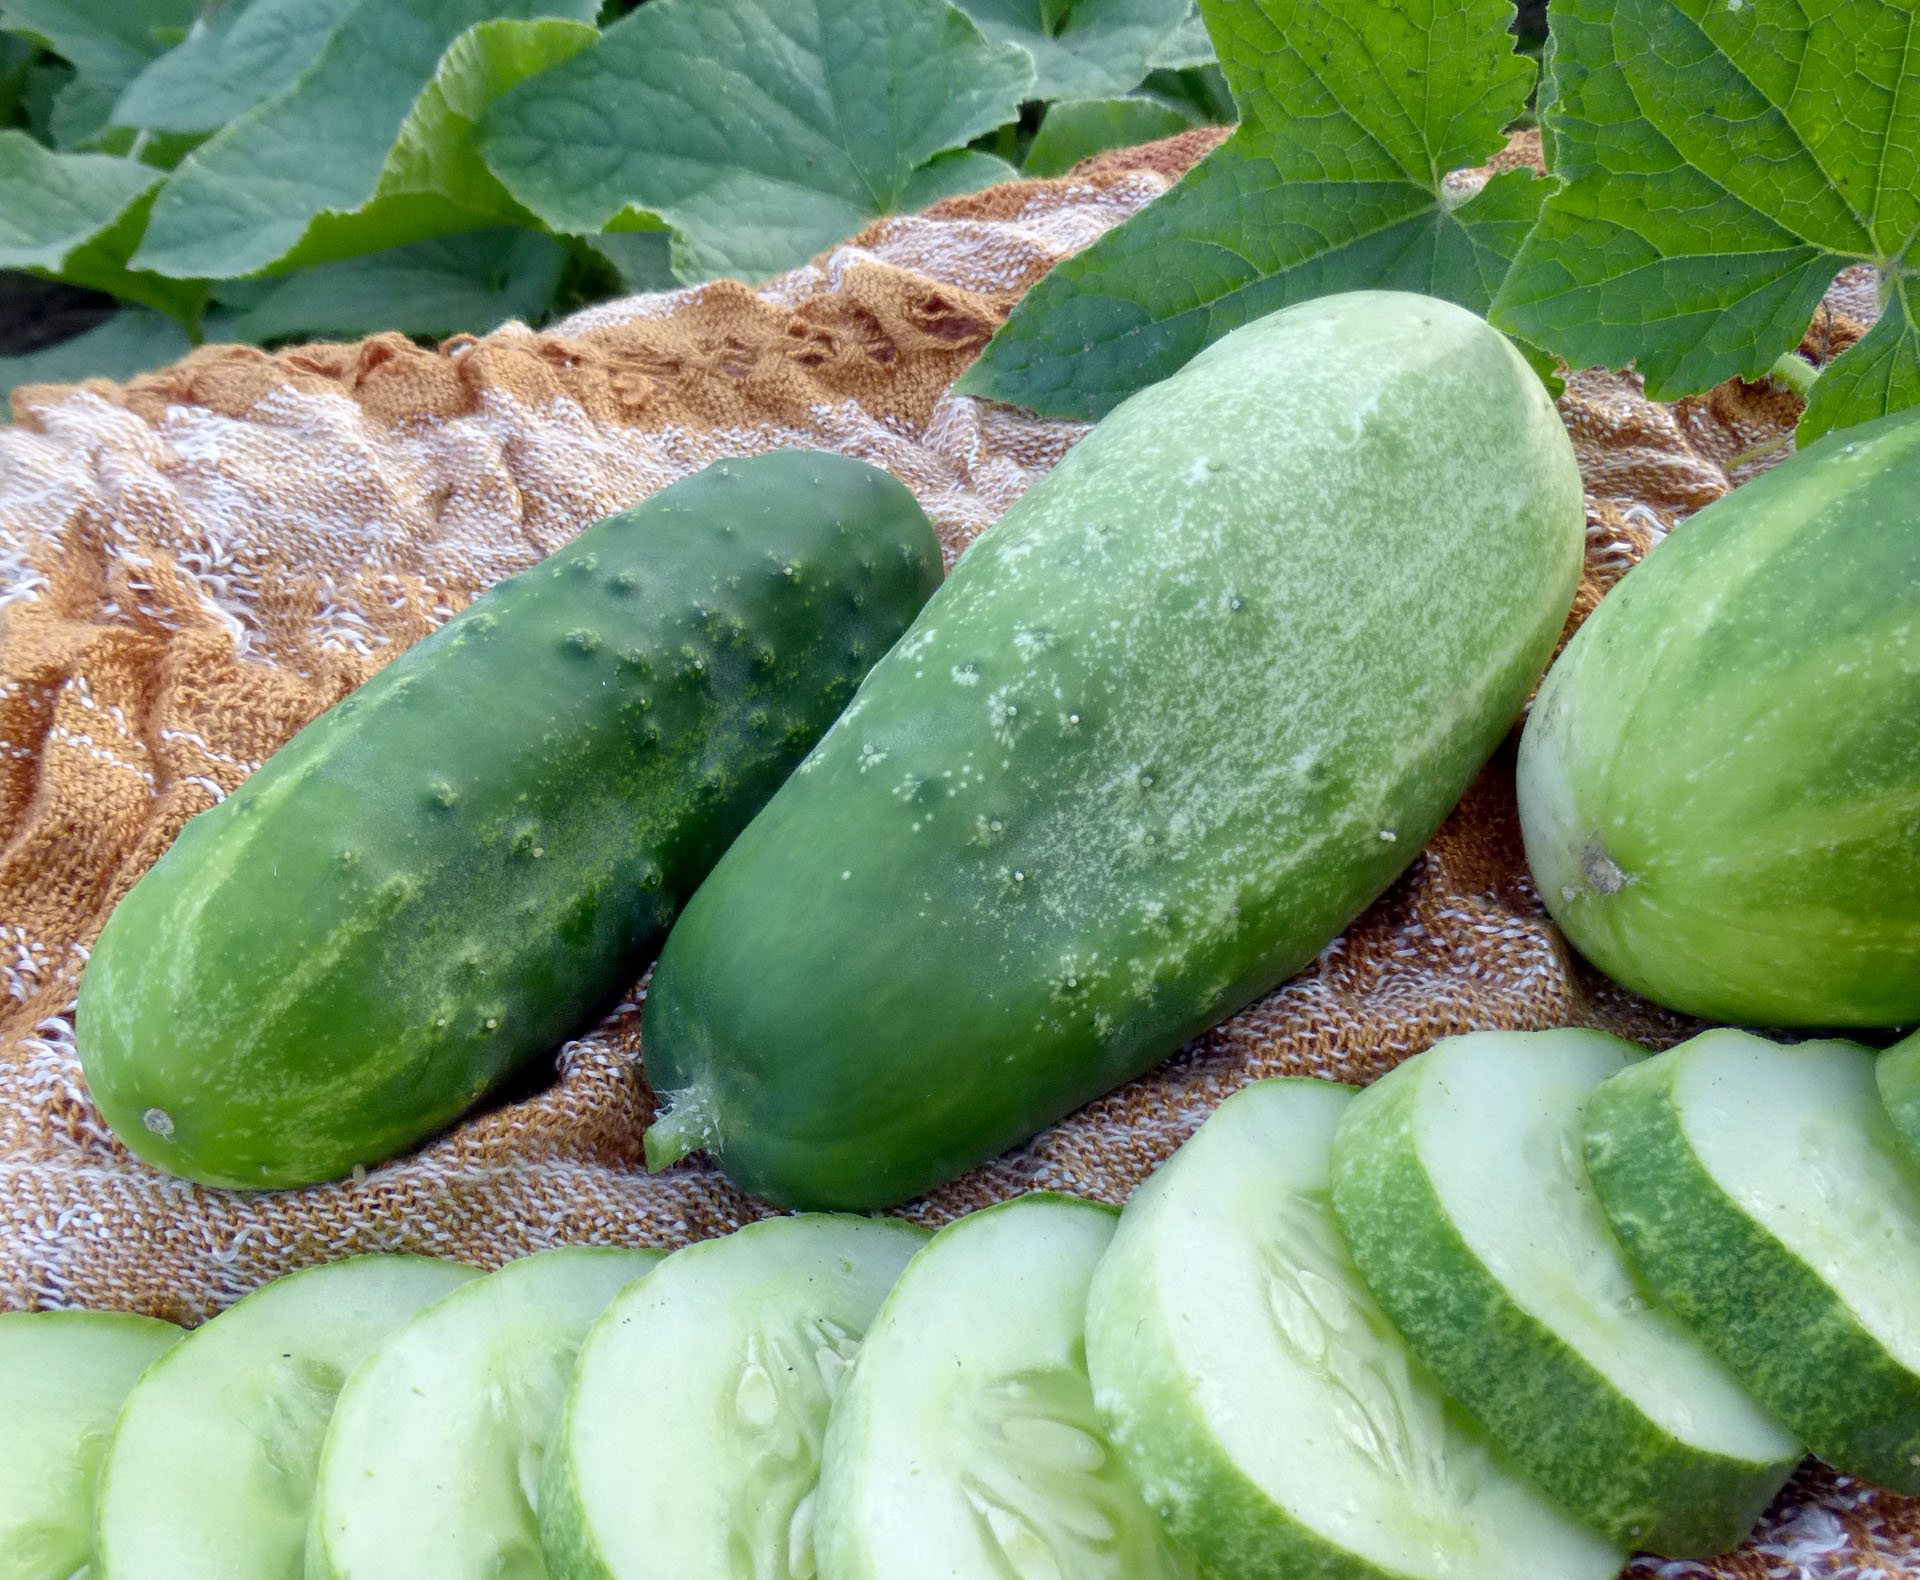 Homemade Pickles Pickling Cucumber, 2 g : Southern Exposure Seed